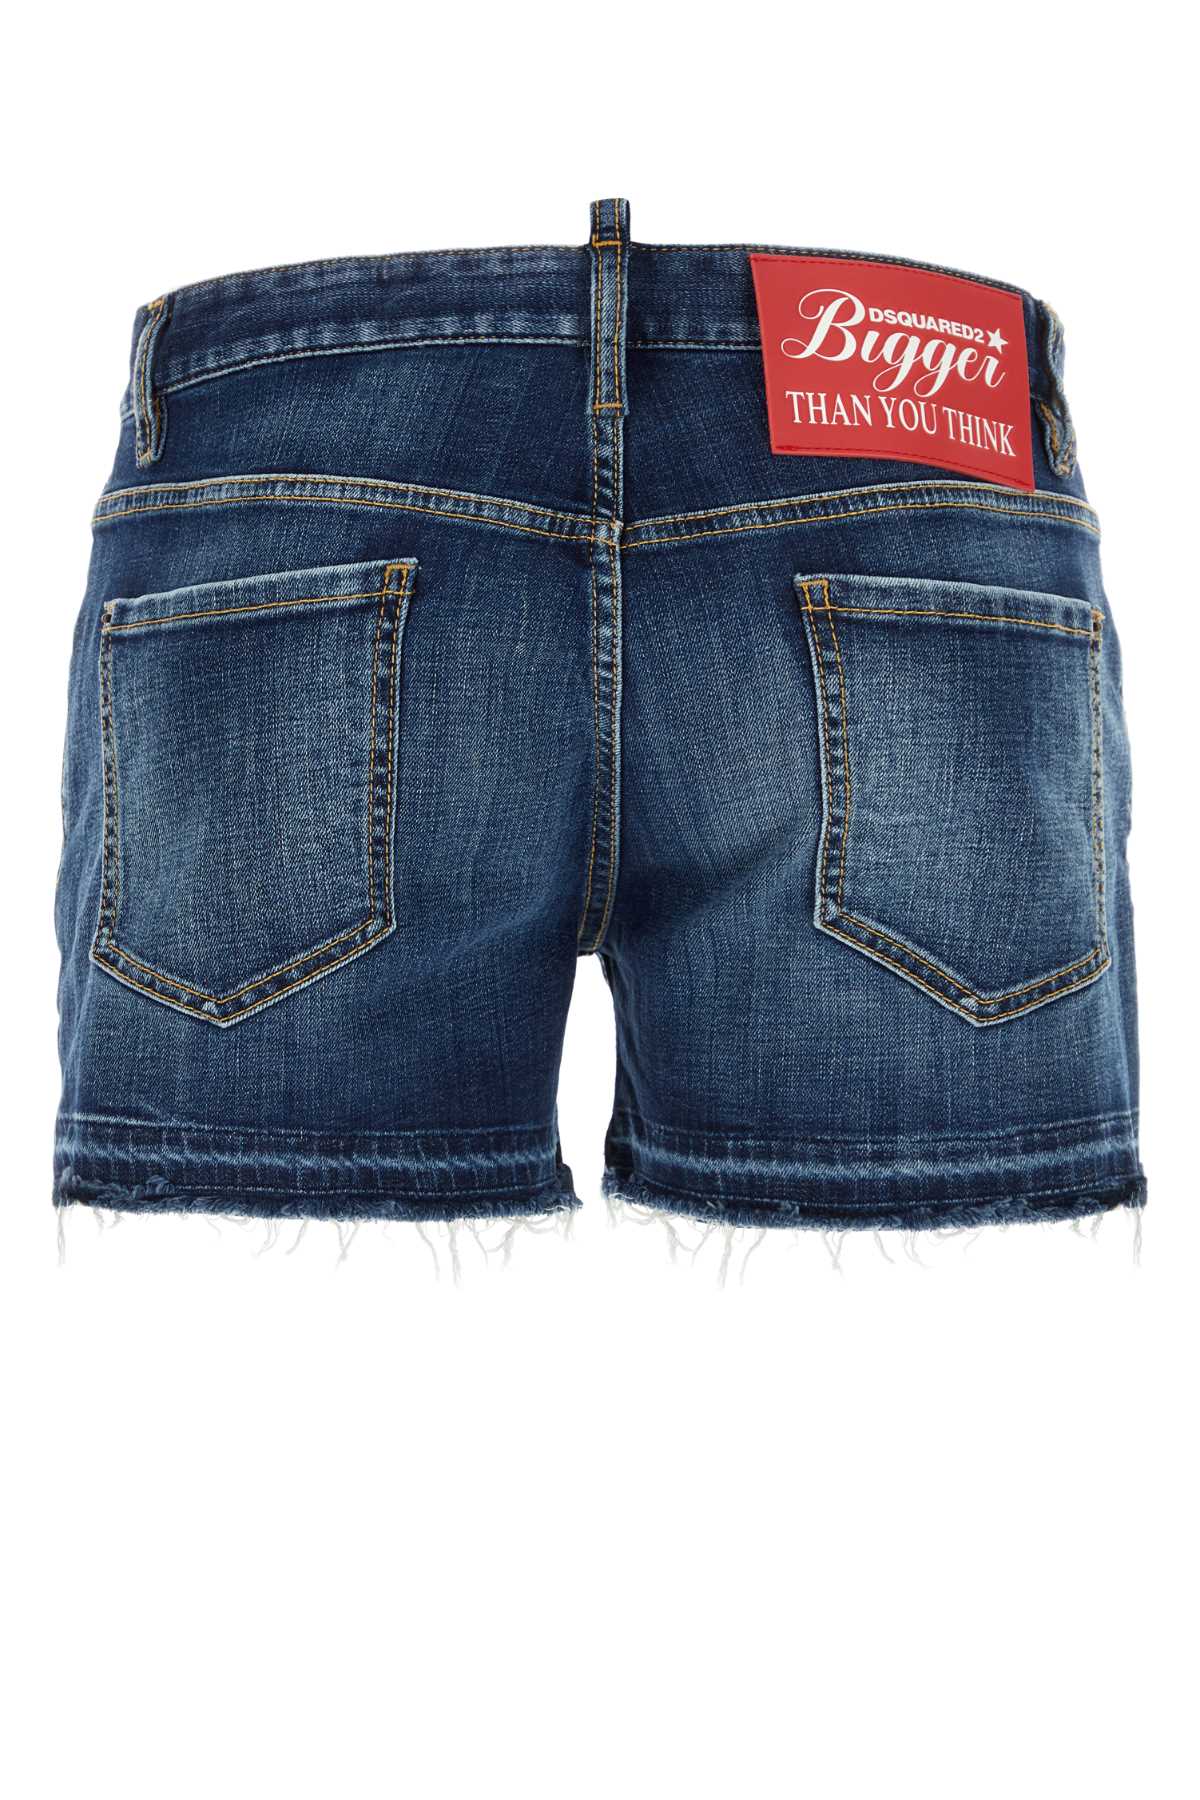 Dsquared2 Blue Stretch Denim Dsquared X Rocco Shorts In Navyblue